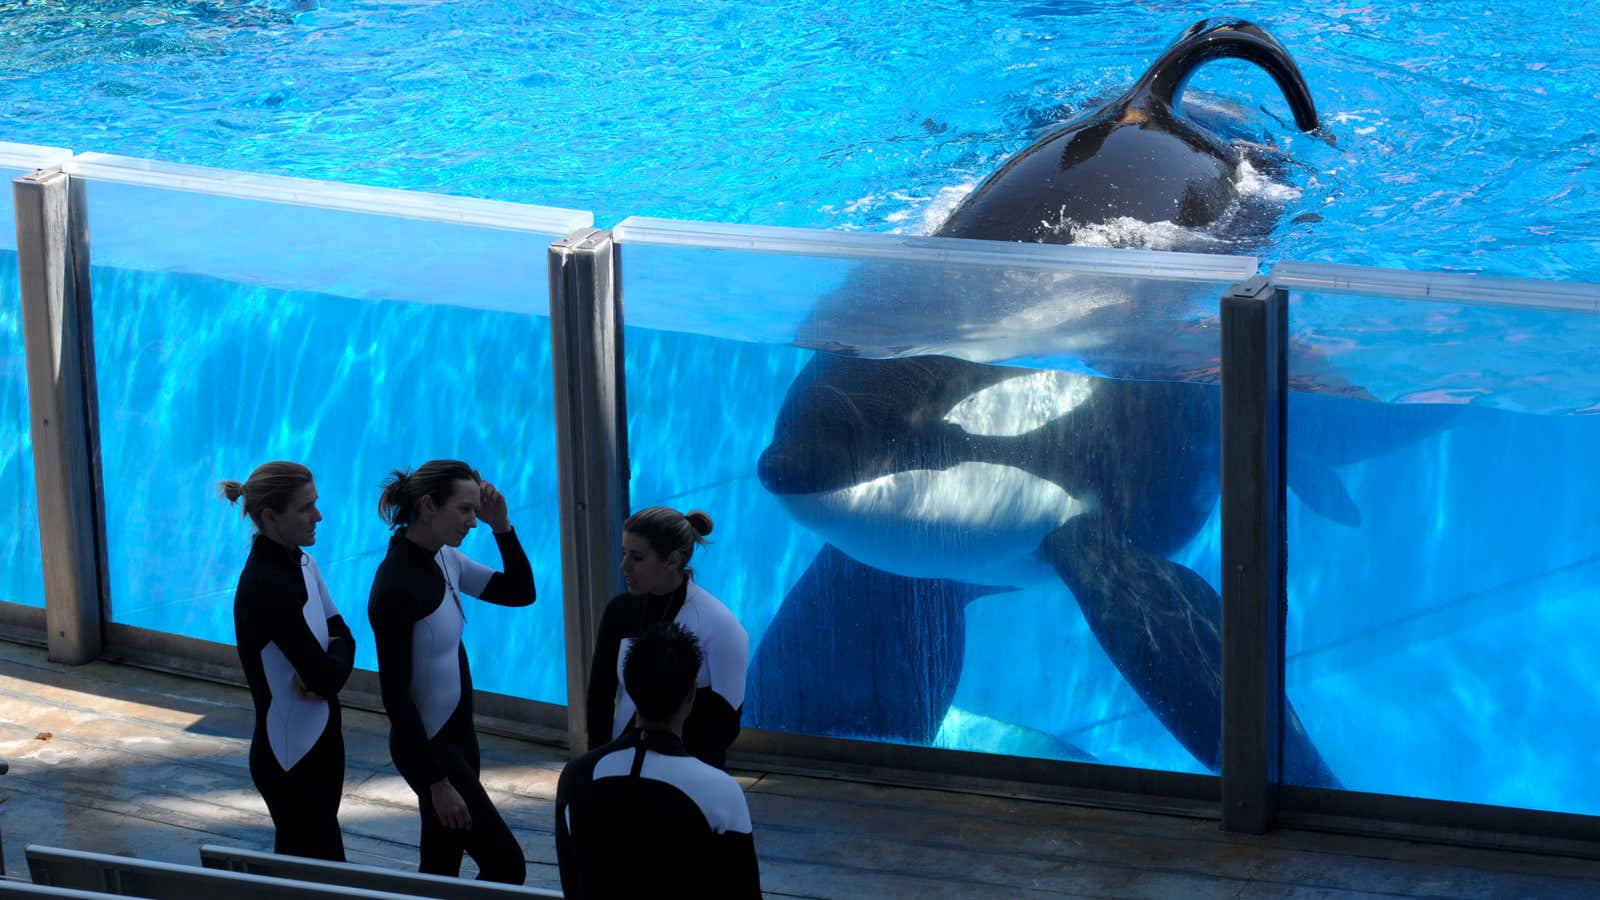 Have people forgotten about “Blackfish” already?